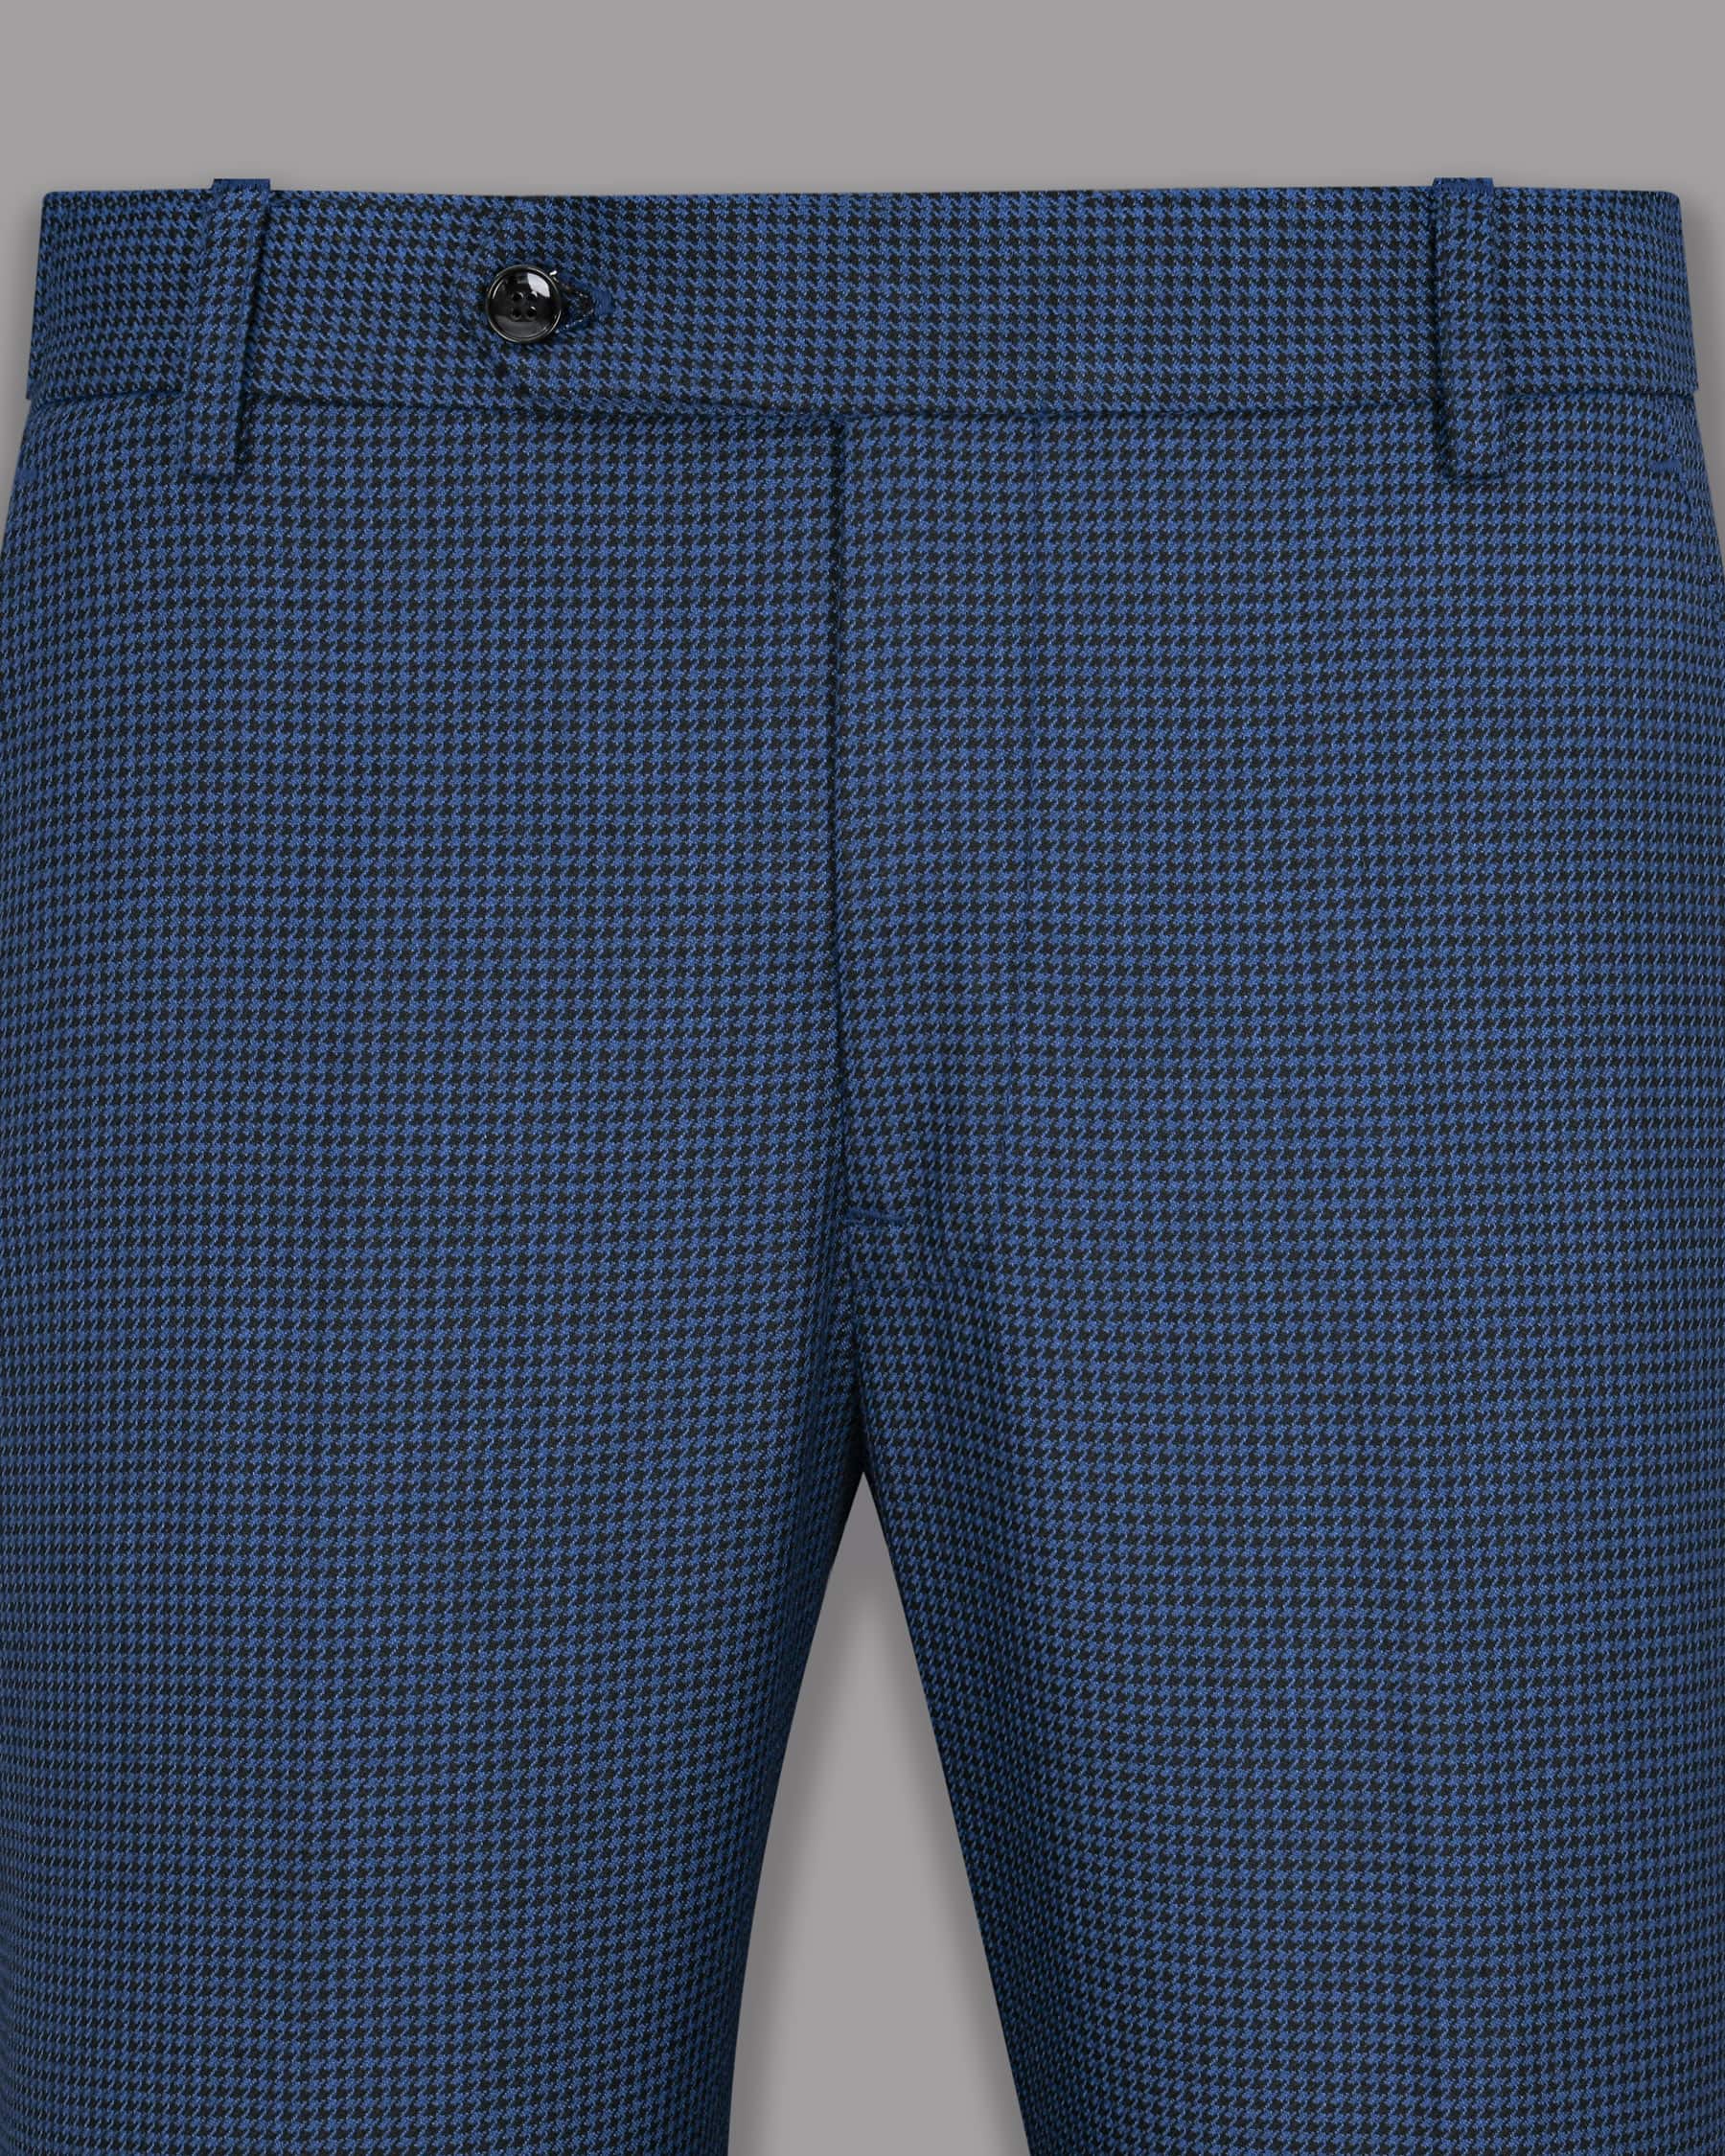 San Juan Blue with Shark Grey Houndstooth Checked Pant T1137-28, T1137-32, T1137-36, T1137-38, T1137-40, T1137-44, T1137-30, T1137-42, T1137-34